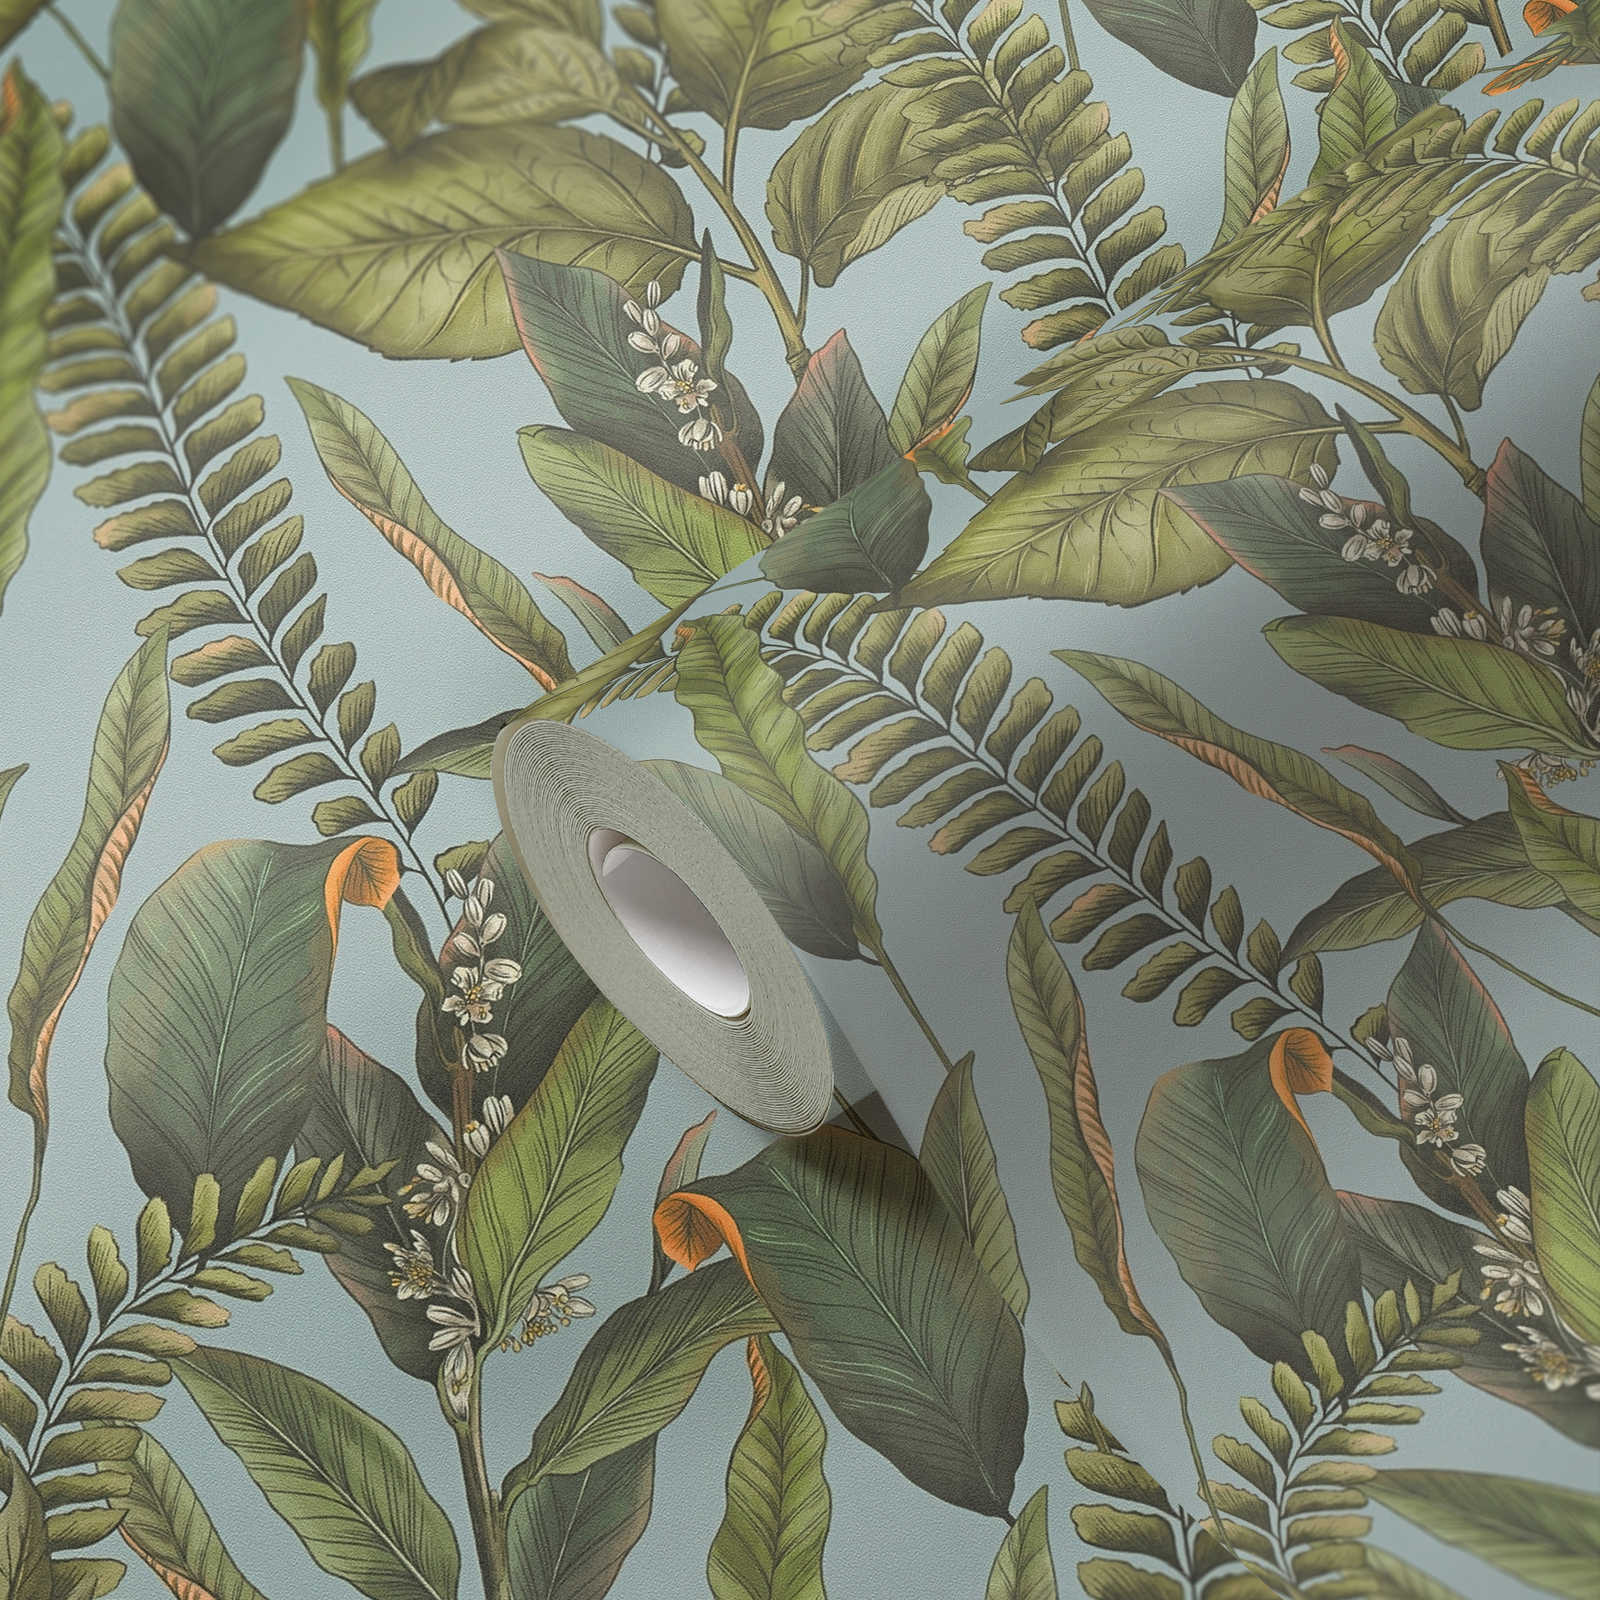             Floral wallpaper in jungle style with leaves & flowers textured matt - blue, green, orange
        